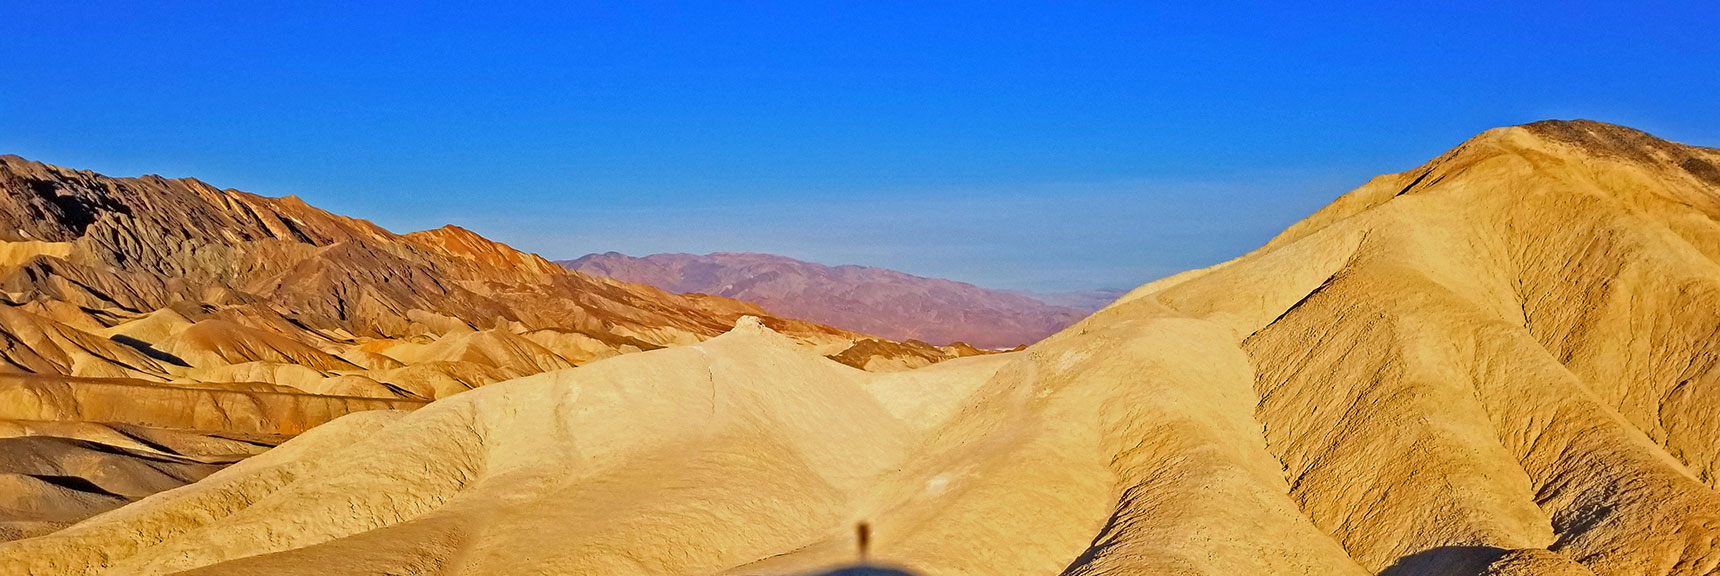 Ascending the Hills Above the Canyon for a More Aerial View. | Twenty Mule Team Canyon | Death Valley National Park, California